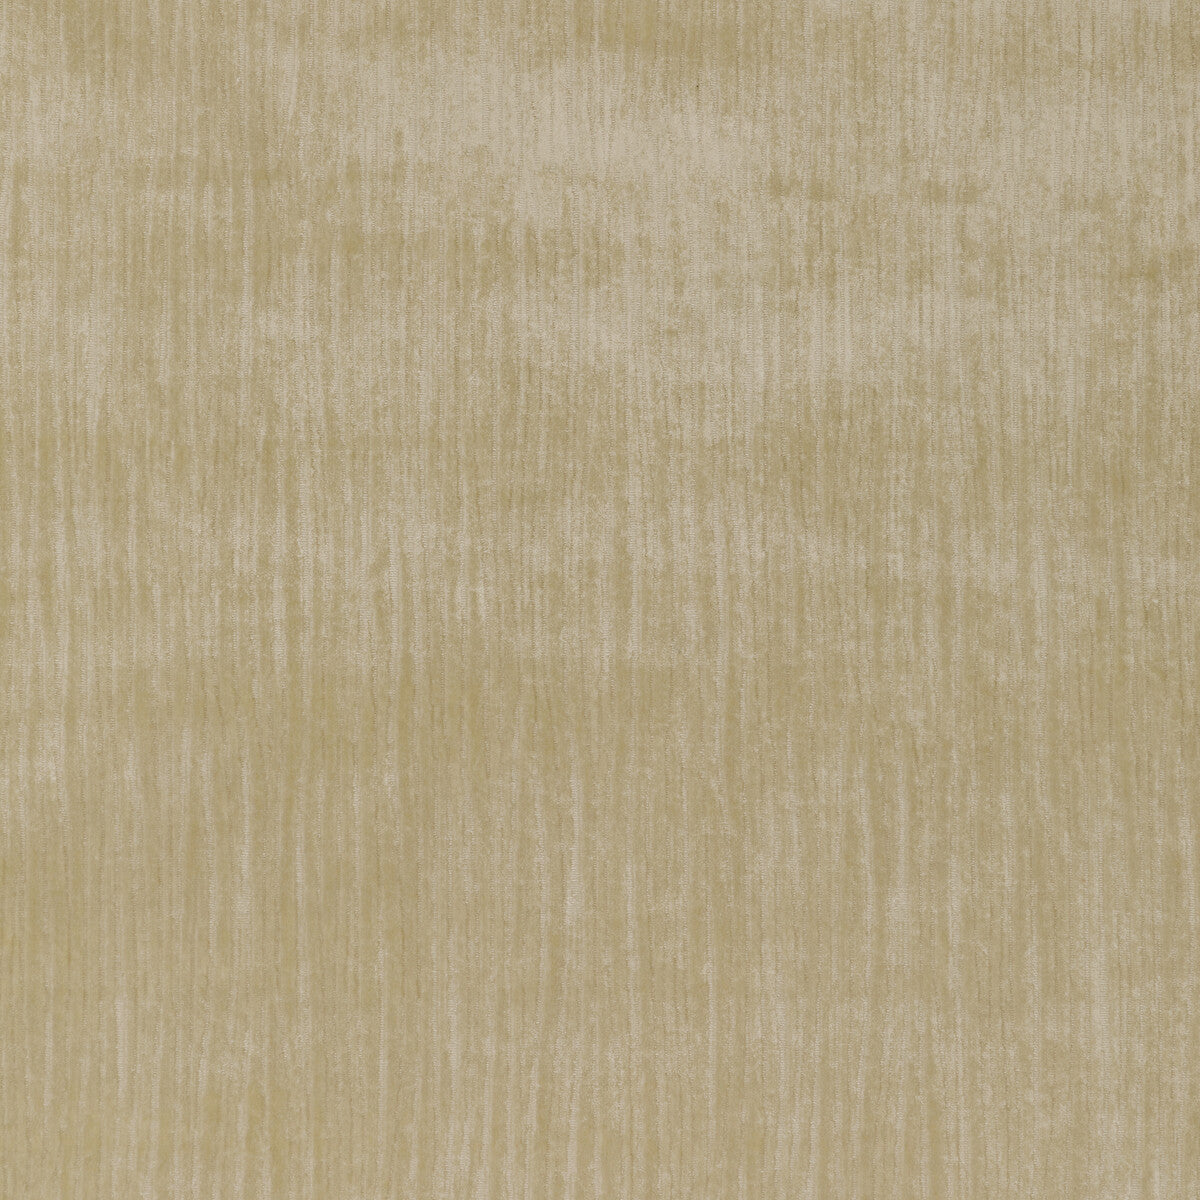 Majesty Velvet fabric in stone color - pattern 36066.11.0 - by Kravet Couture